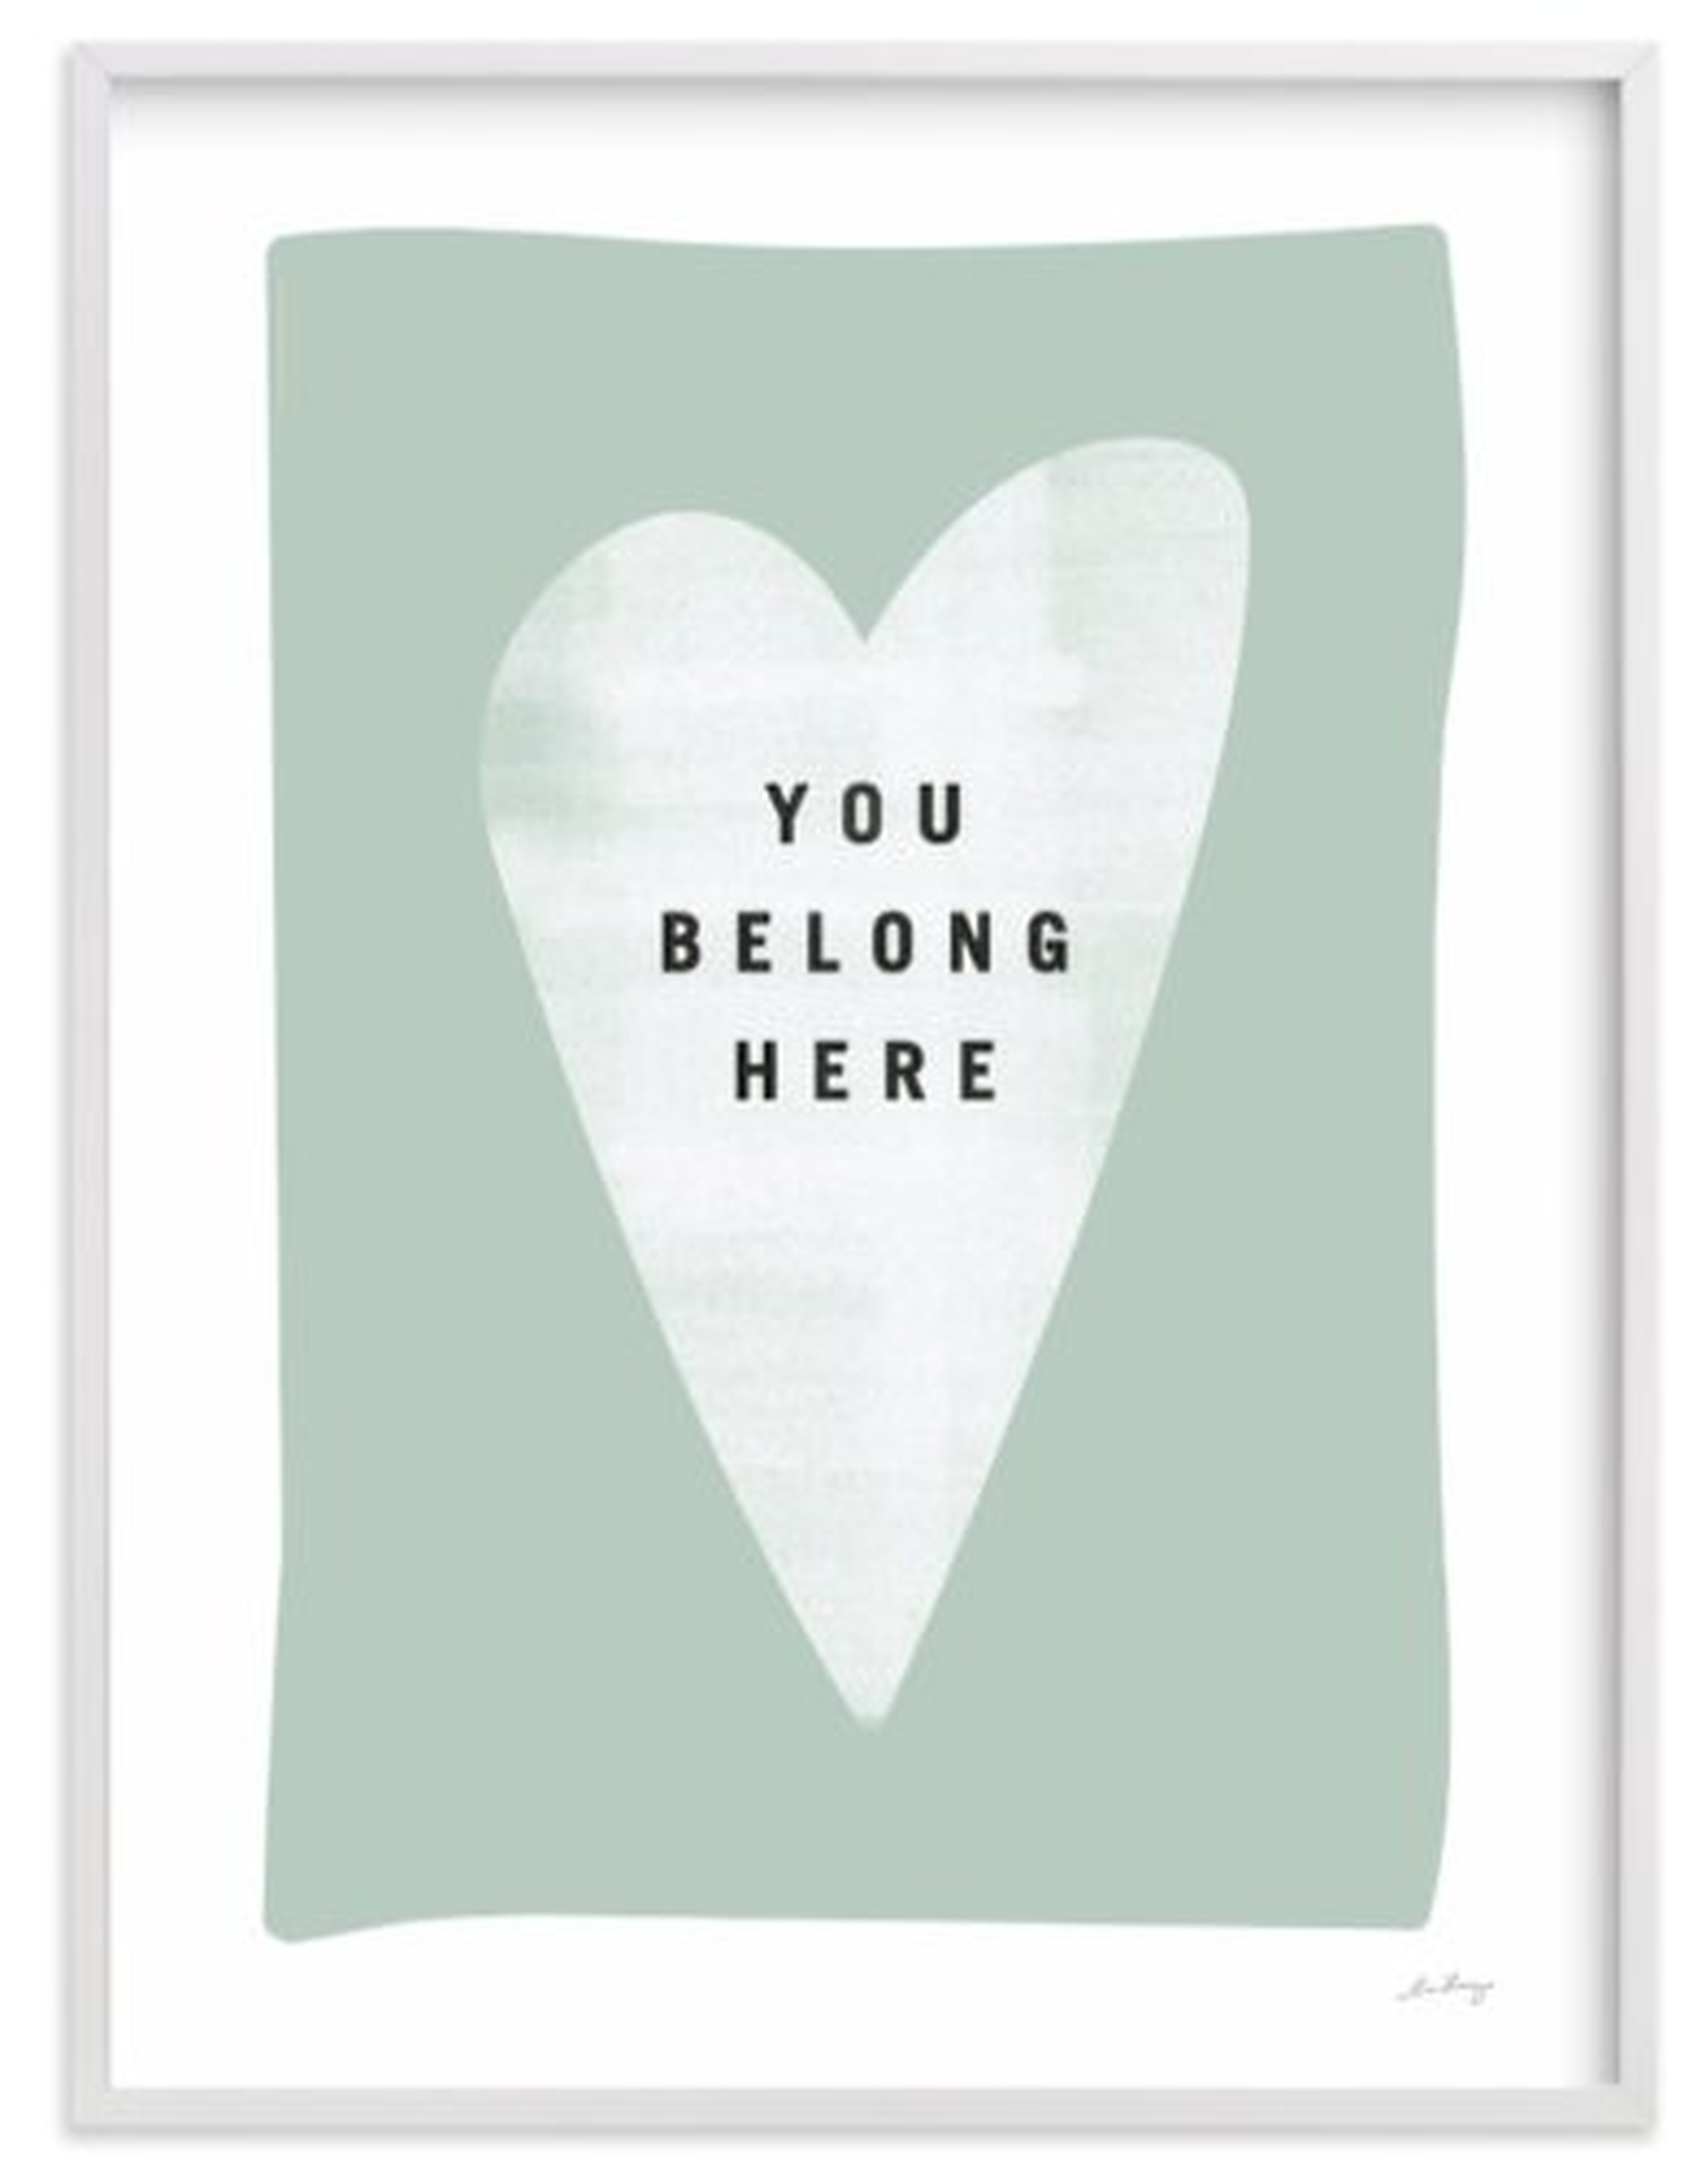 You belong here - Minted